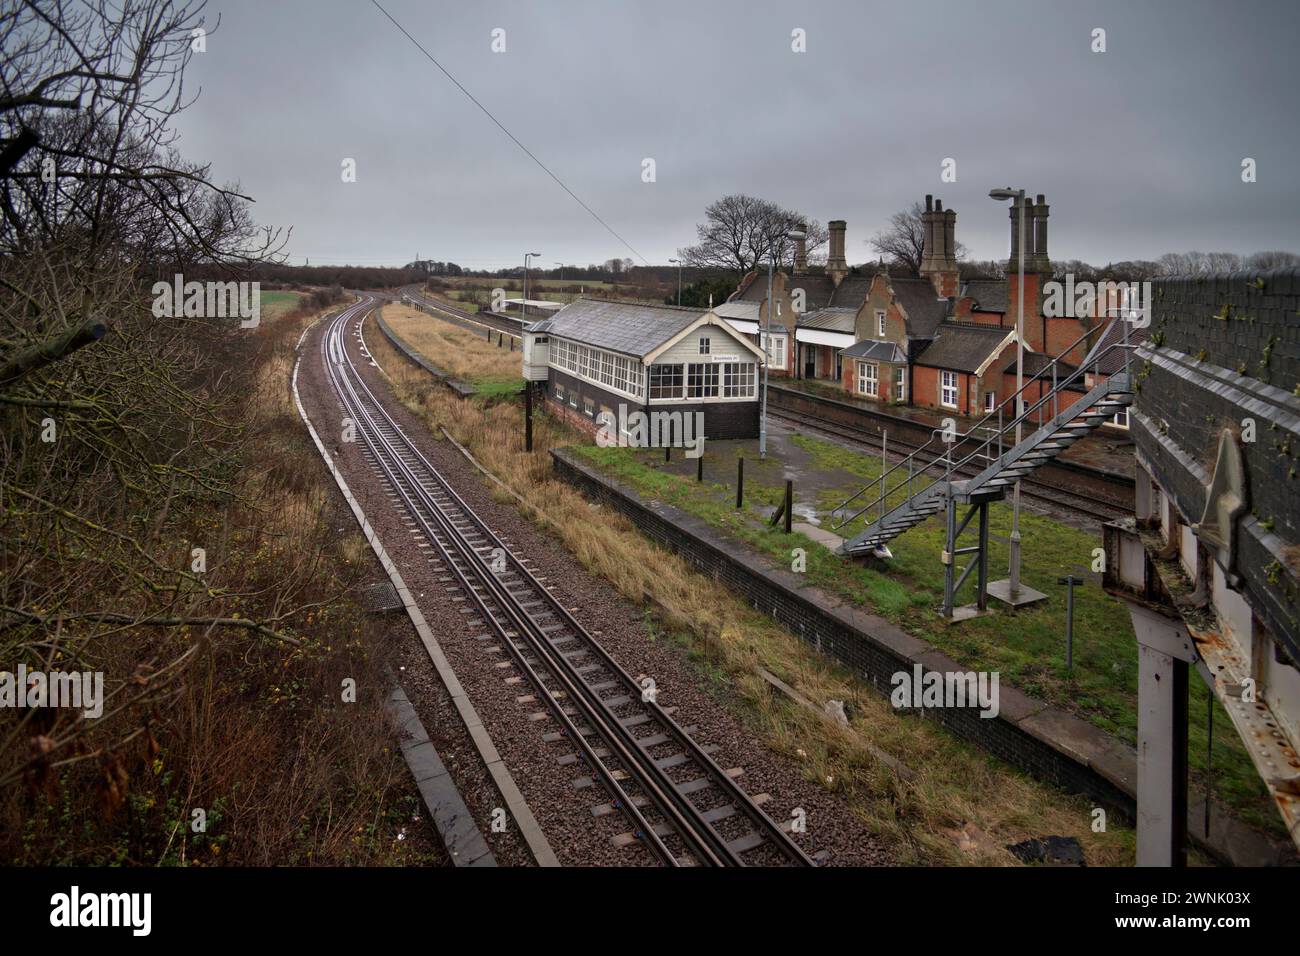 24/12/2015 Brocklesby junction signal box (Lincs) on its last day in use before it closed Stock Photo